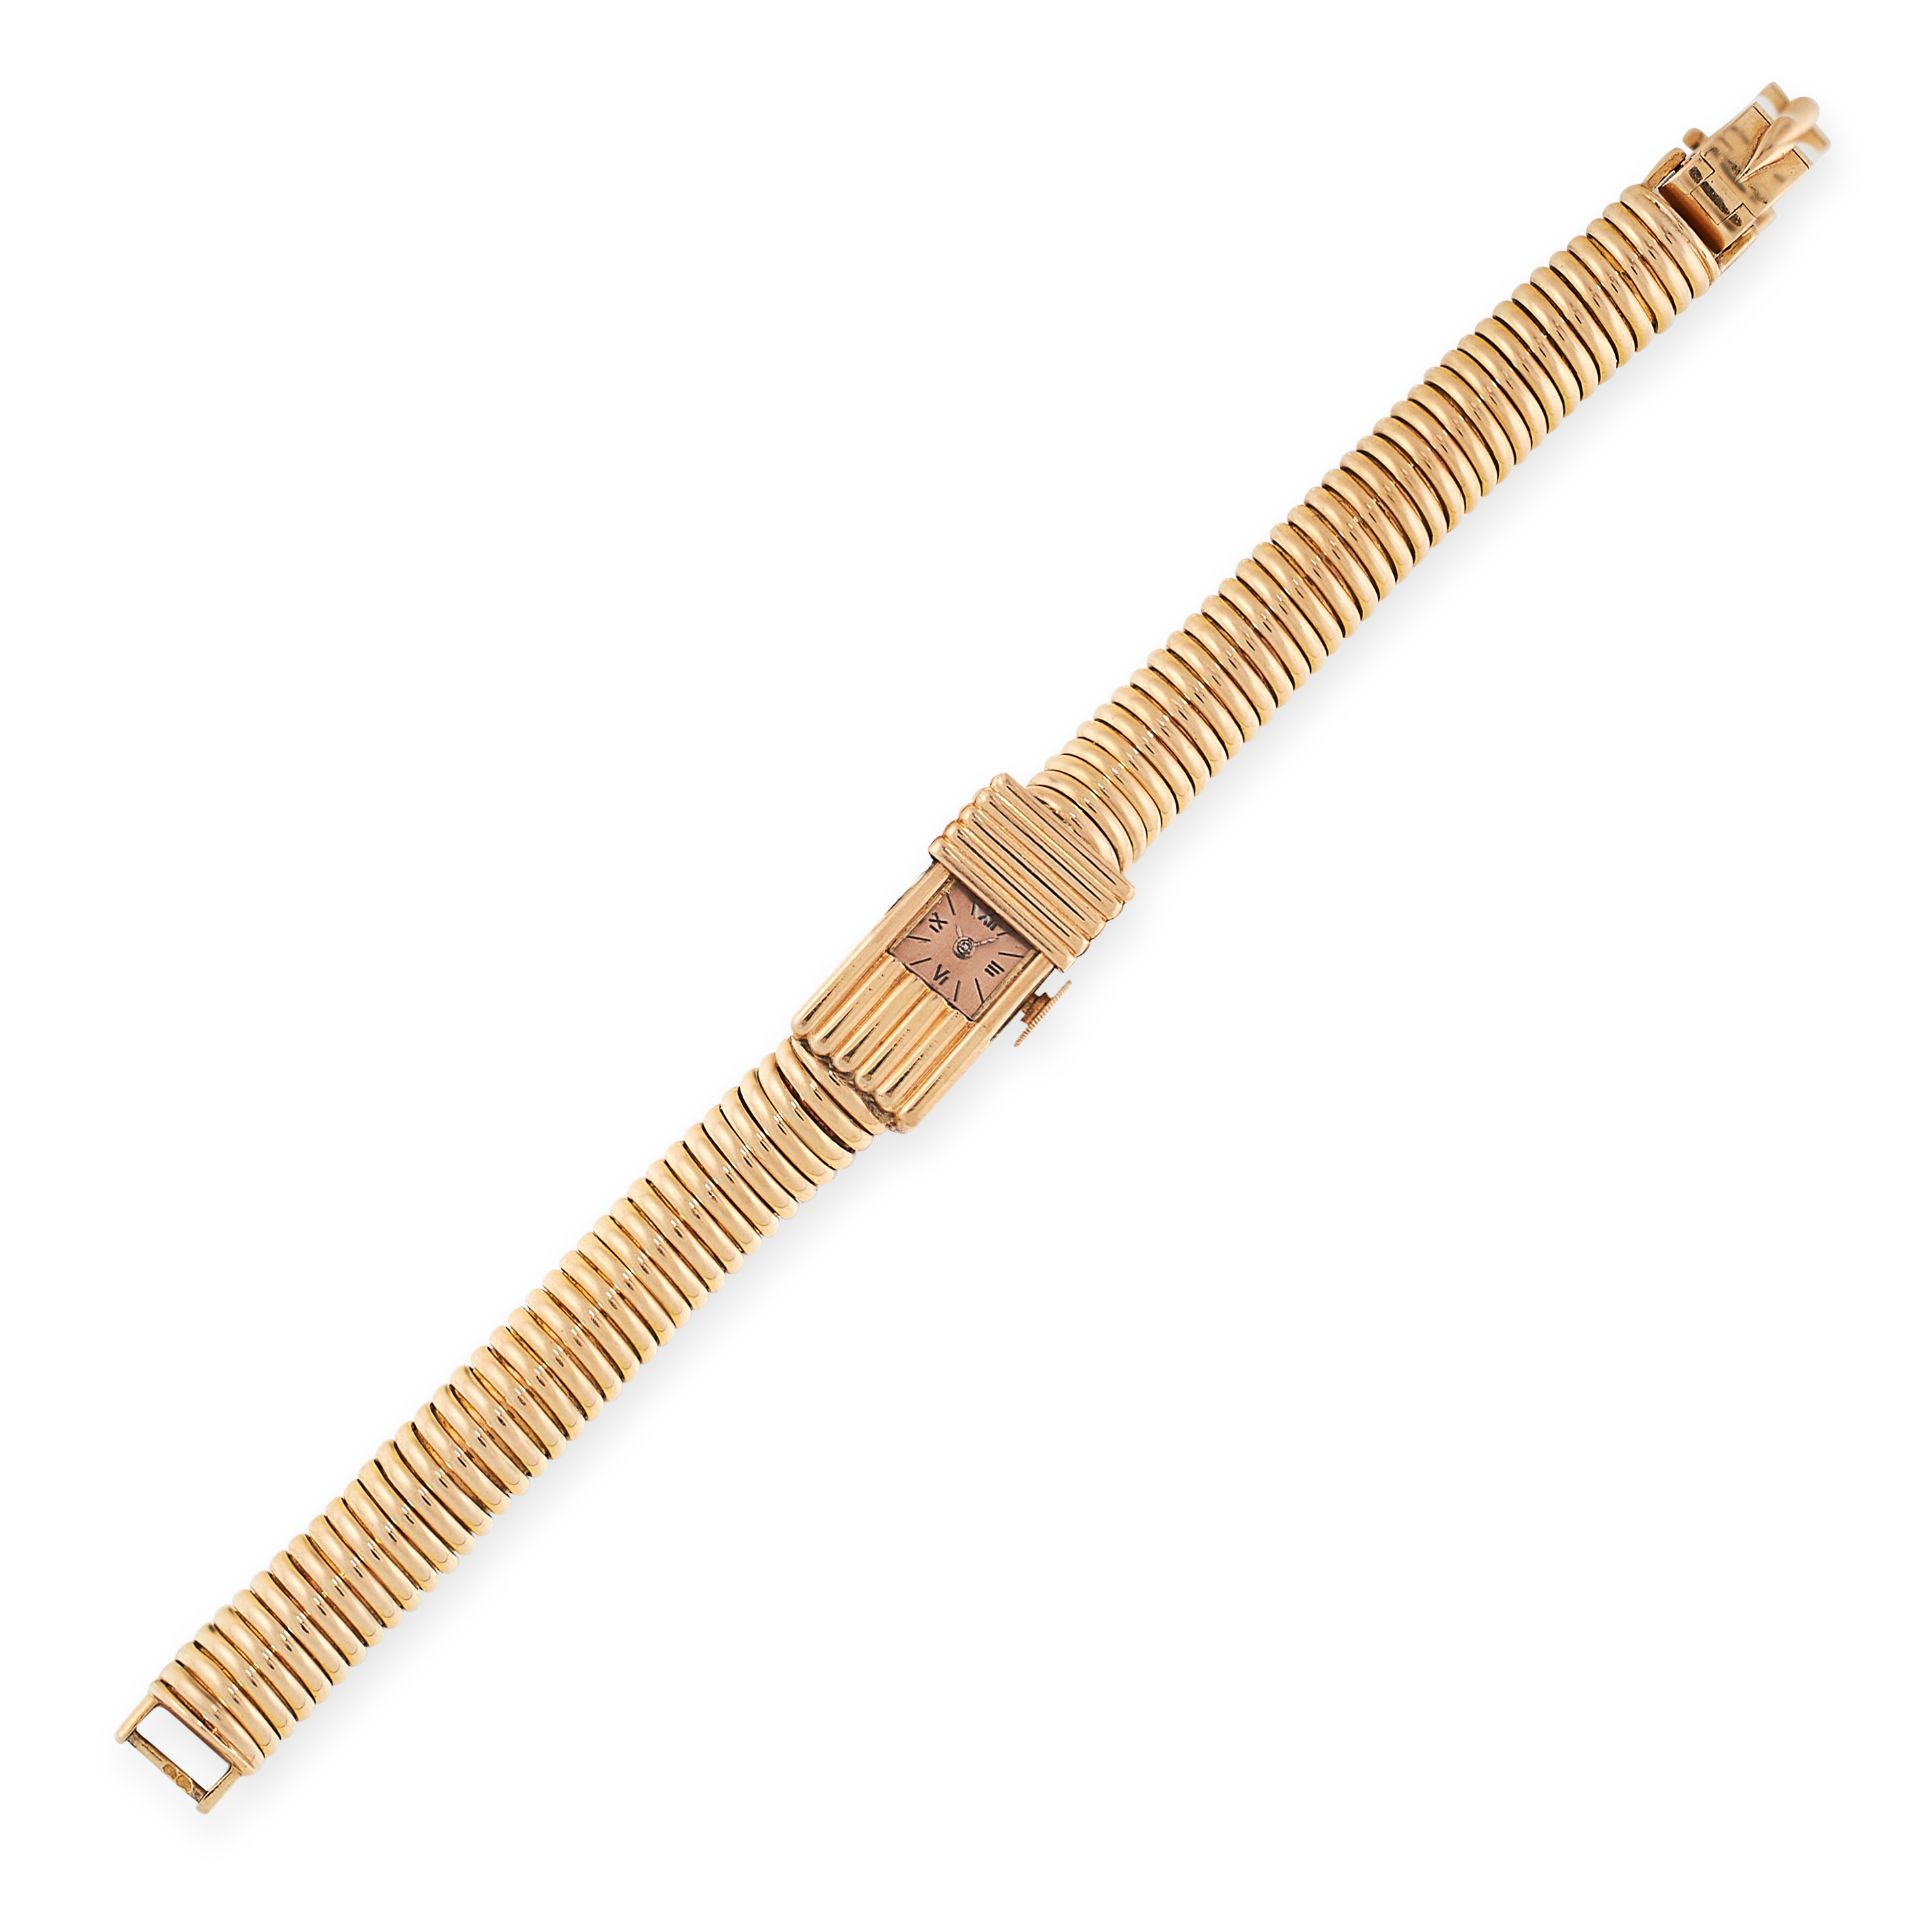 A VINTAGE CONCEALED WRIST WATCH BRACELET in 18ct yellow gold, the articulated gaspipe bracelet